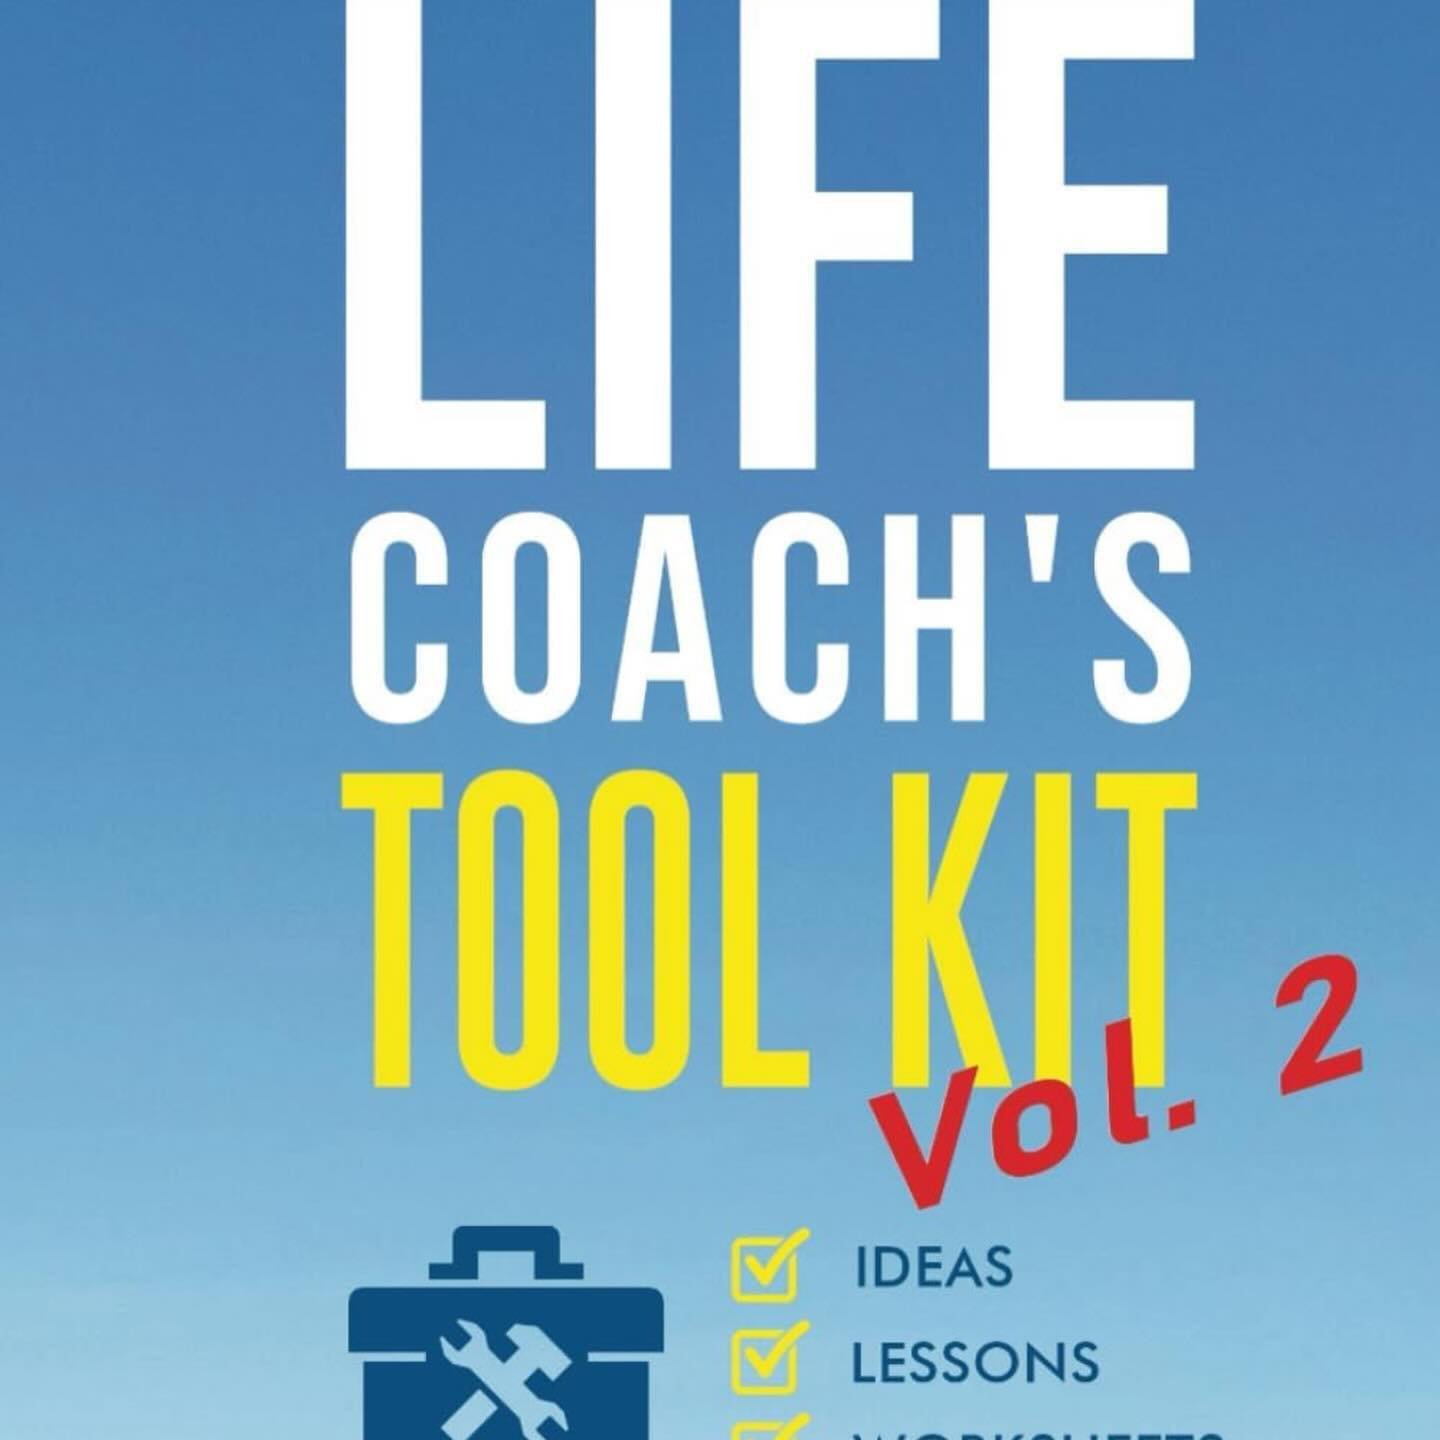 The title might suggest this book is just for coaches. 

It&rsquo;s not. 

It&rsquo;s for anyone looking to add to their arsenal of tools for change.

Coaches are just people committed to change. 

Change for themselves and change for their clients. 